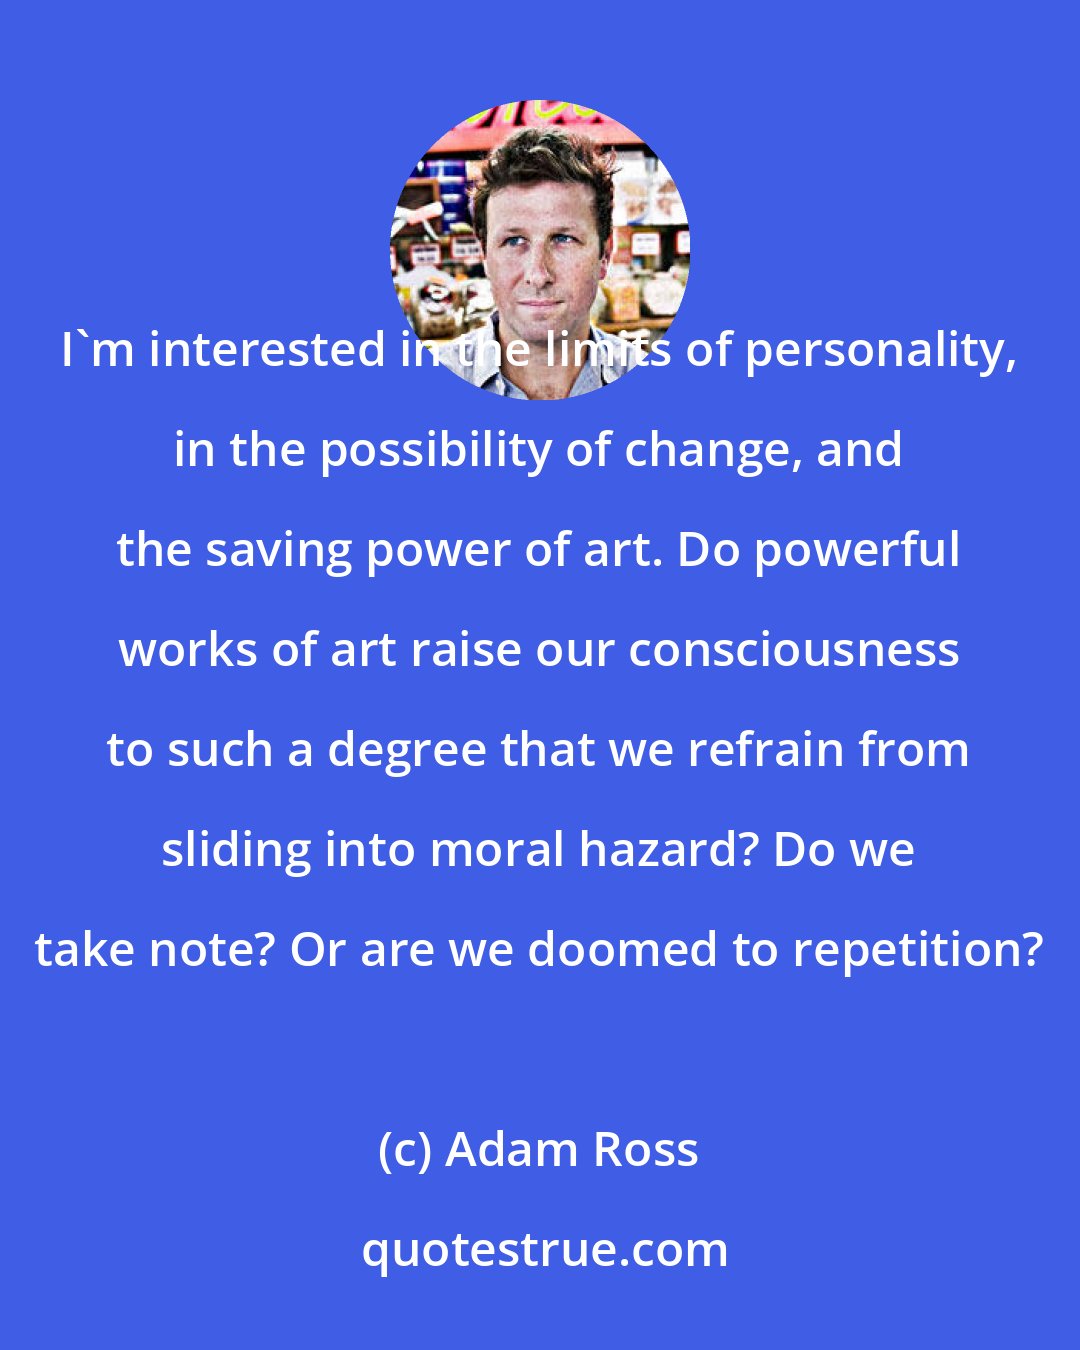 Adam Ross: I'm interested in the limits of personality, in the possibility of change, and the saving power of art. Do powerful works of art raise our consciousness to such a degree that we refrain from sliding into moral hazard? Do we take note? Or are we doomed to repetition?